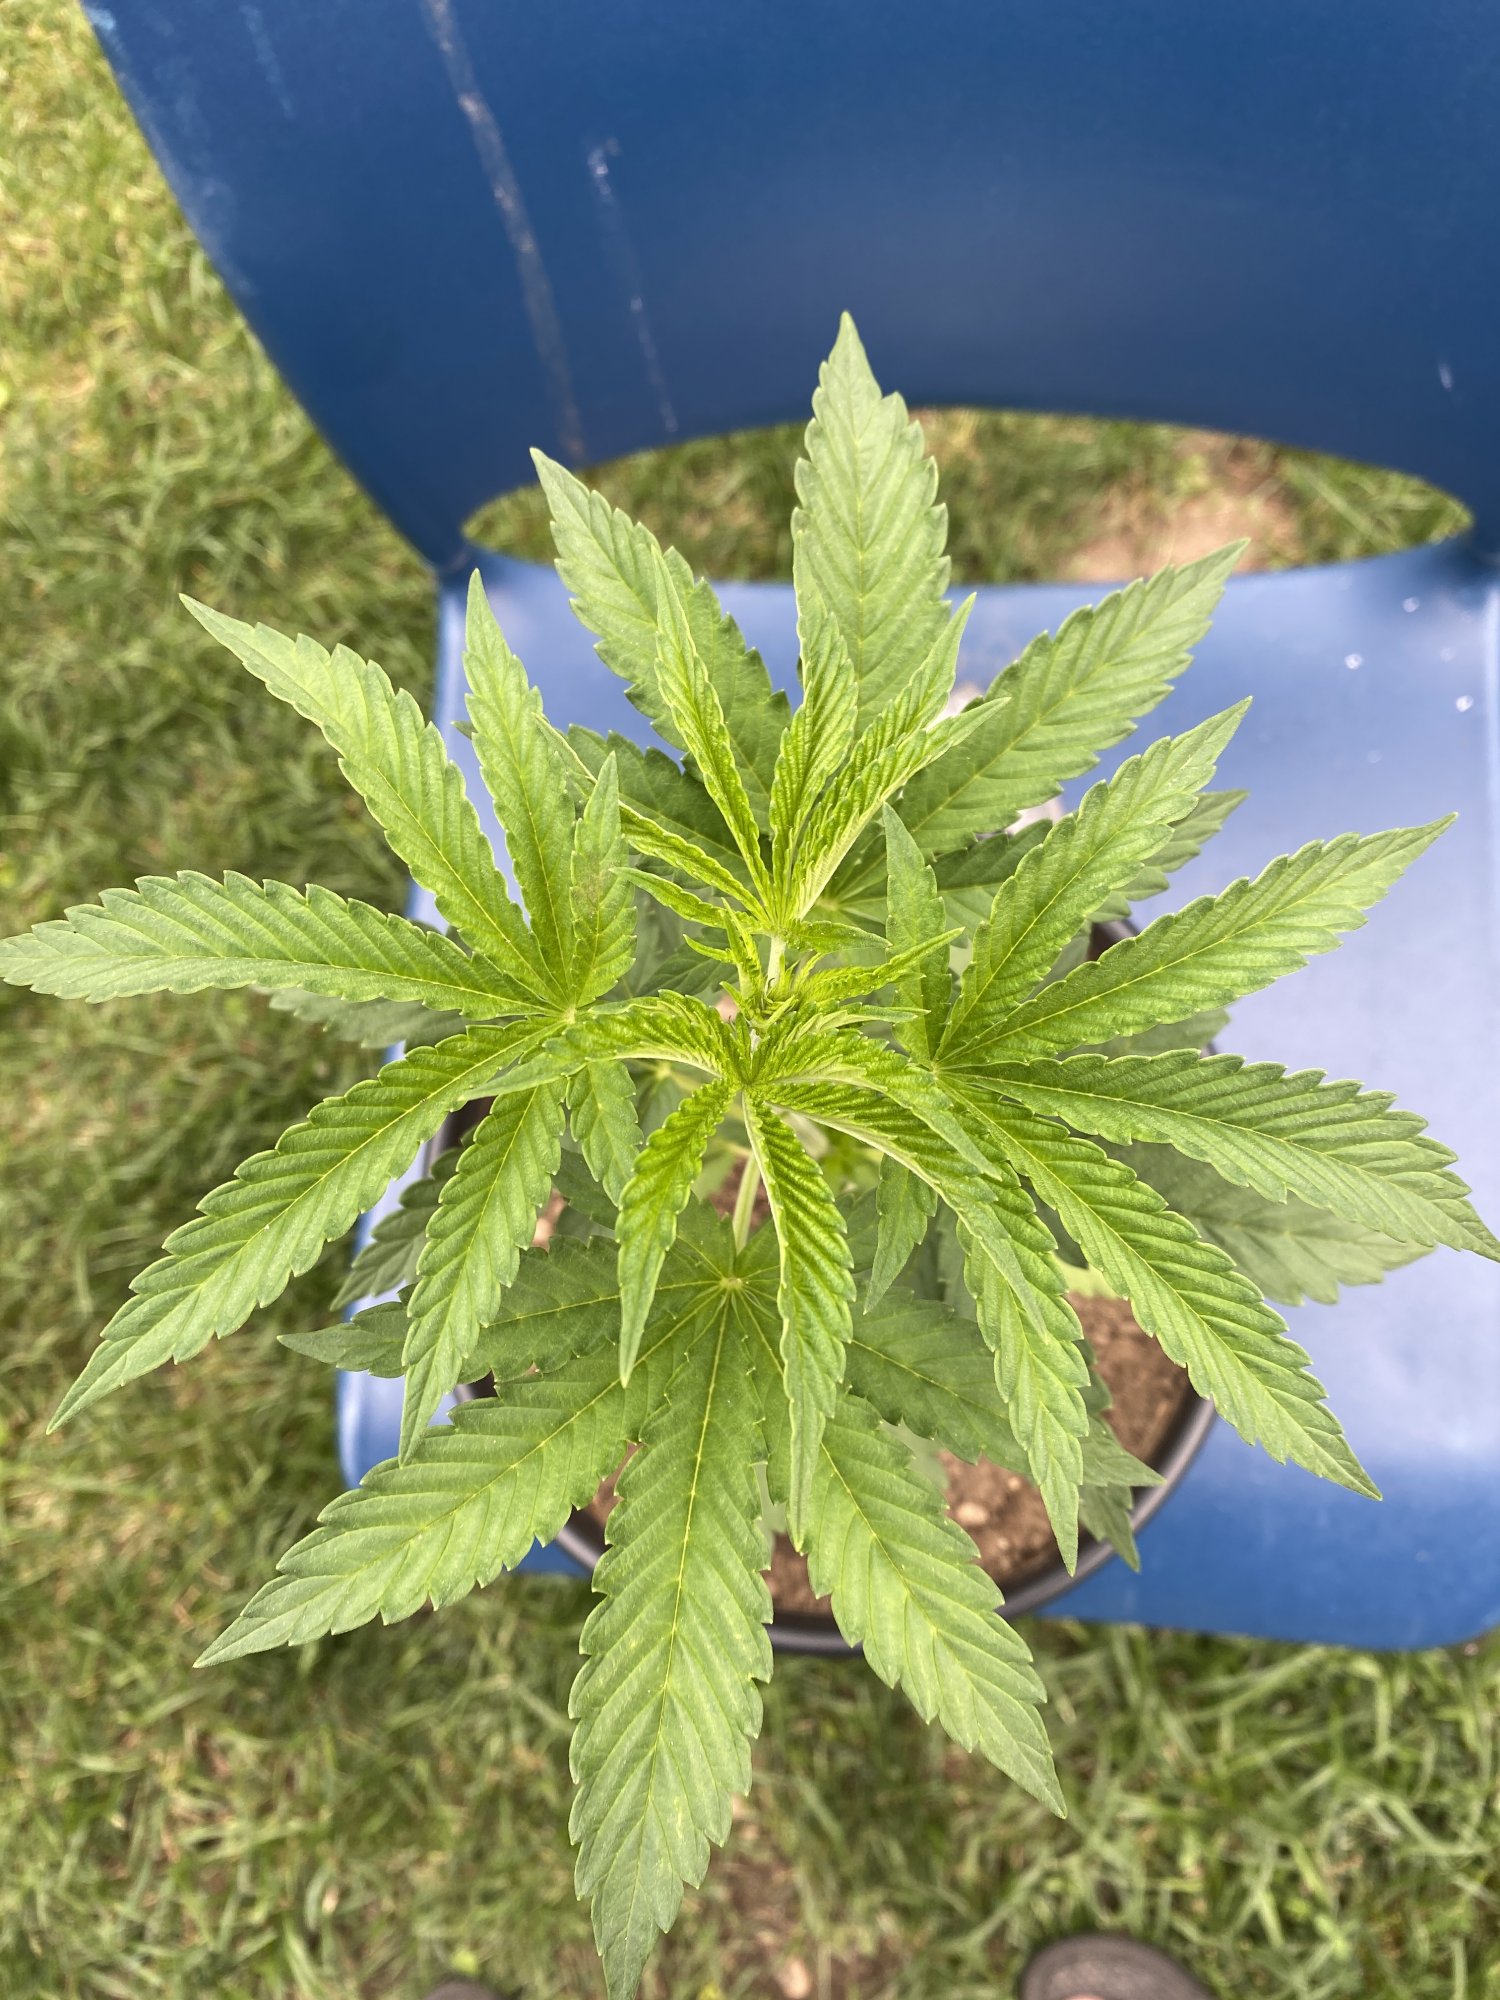 First time grower noticed the leaves on the bottom started turning greenish yellowish 5